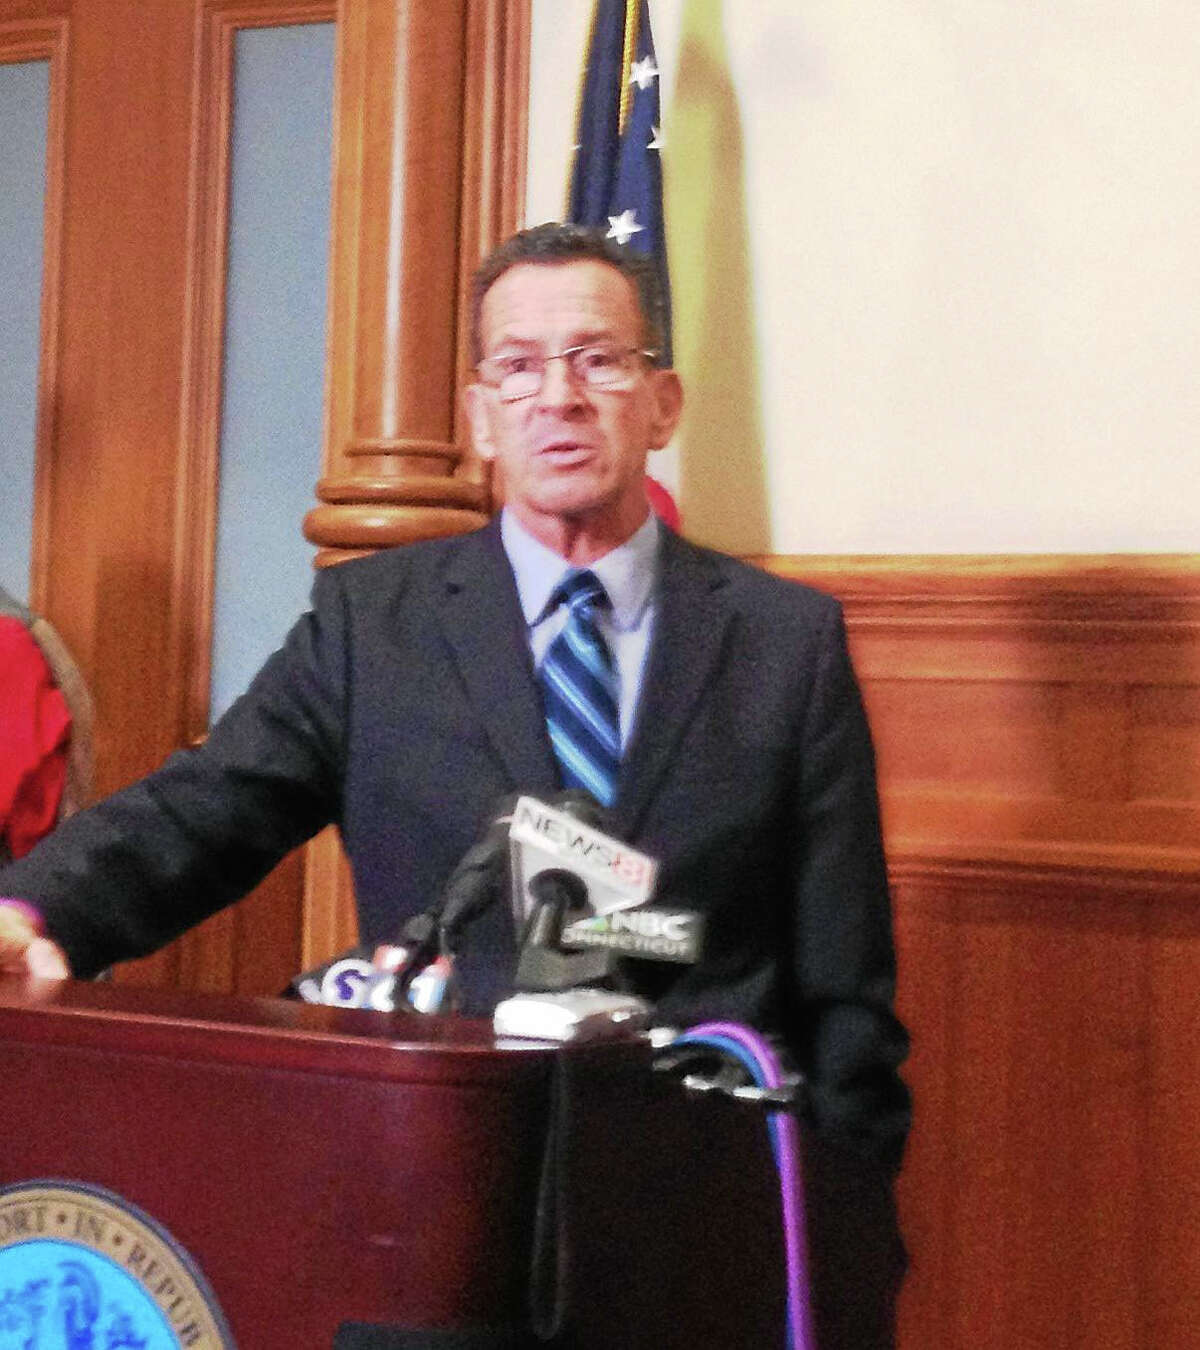 Gov. Dannel P. Malloy, speaking in New Haven, said the U.S. has a moral obligation to take in Syrian families.